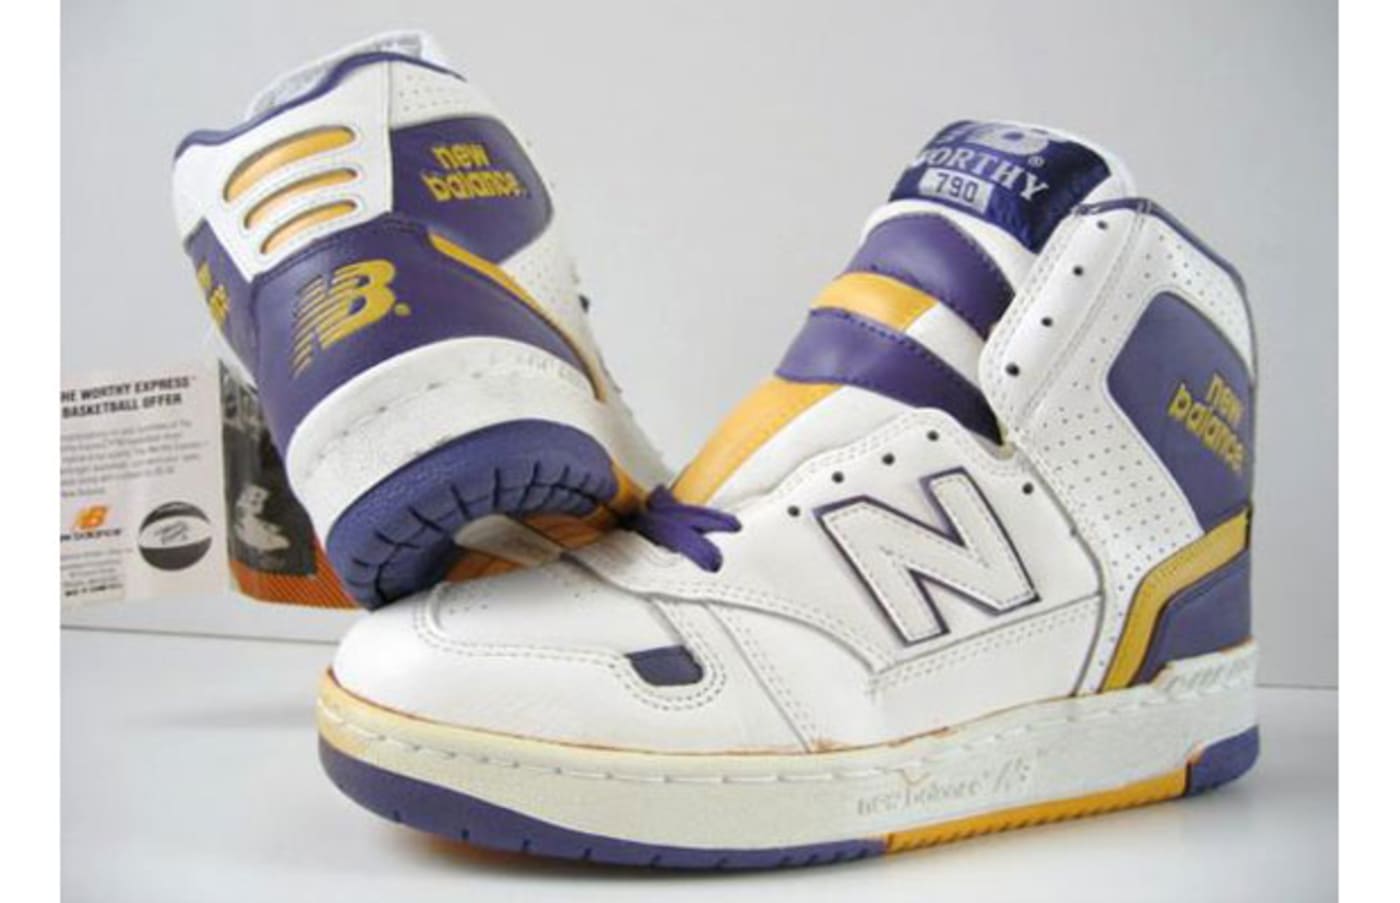 old school new balance basketball shoes